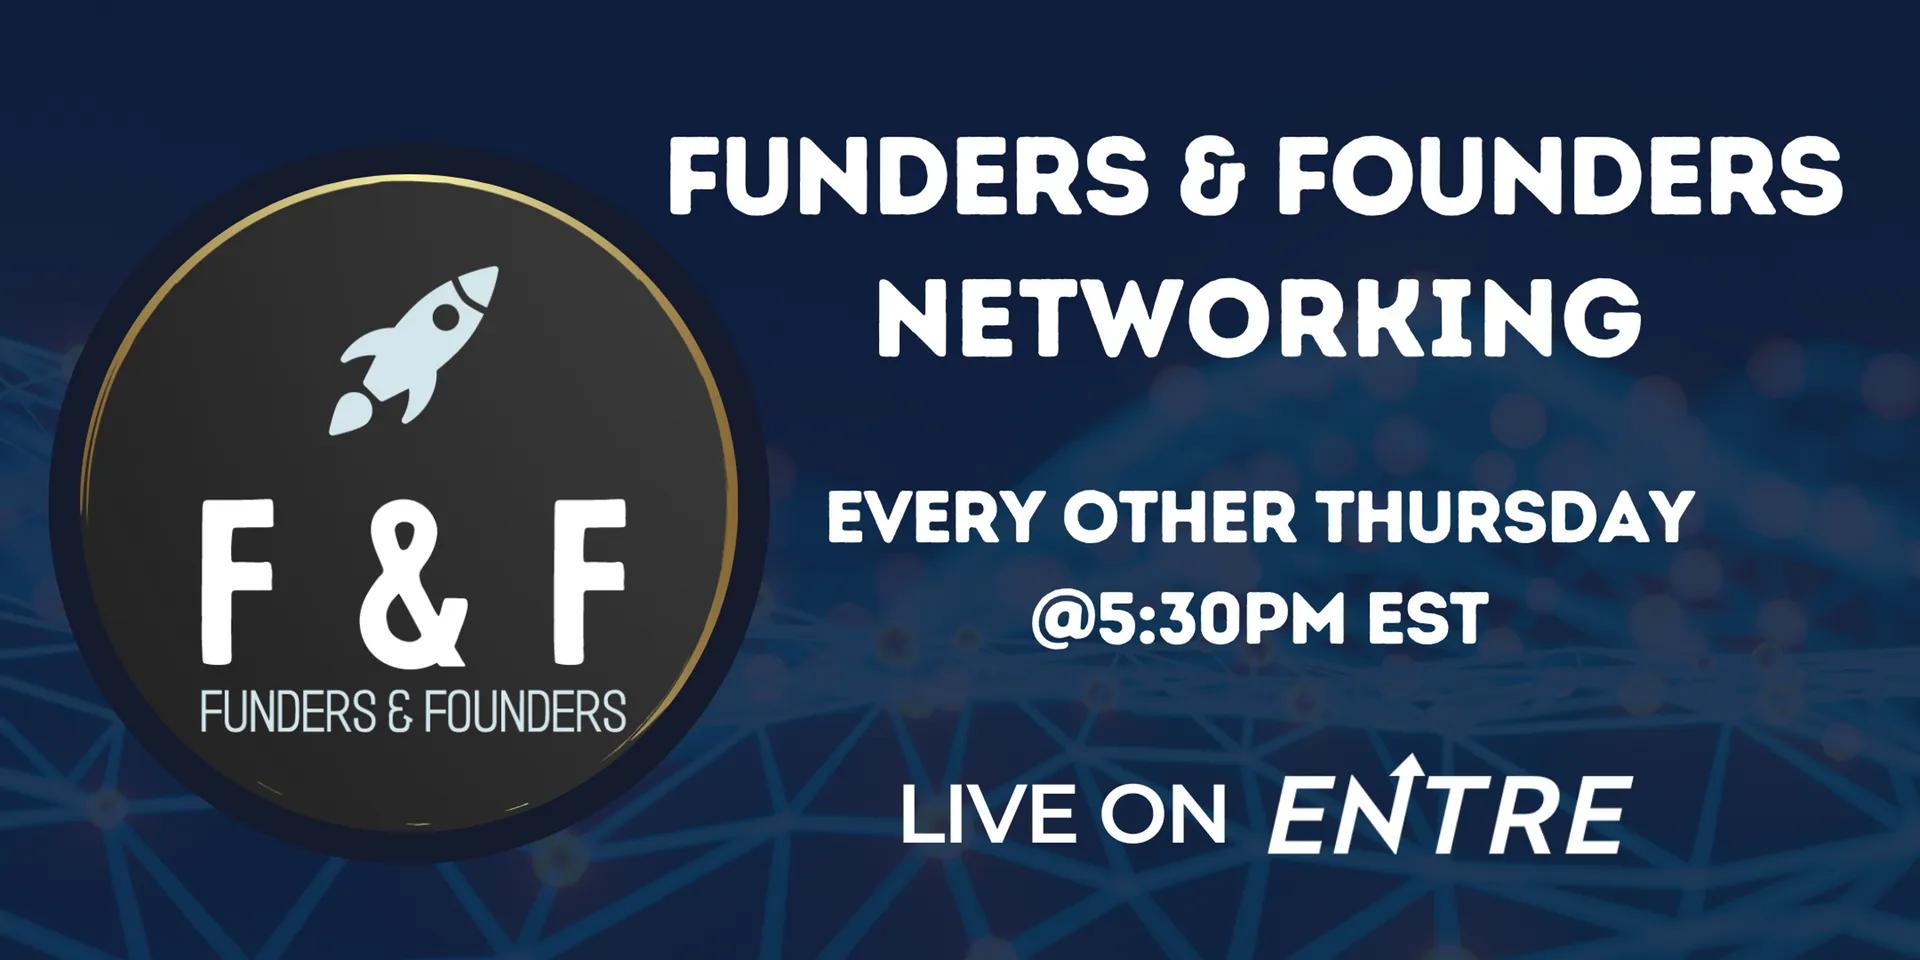 Funders and Founders Power Networking